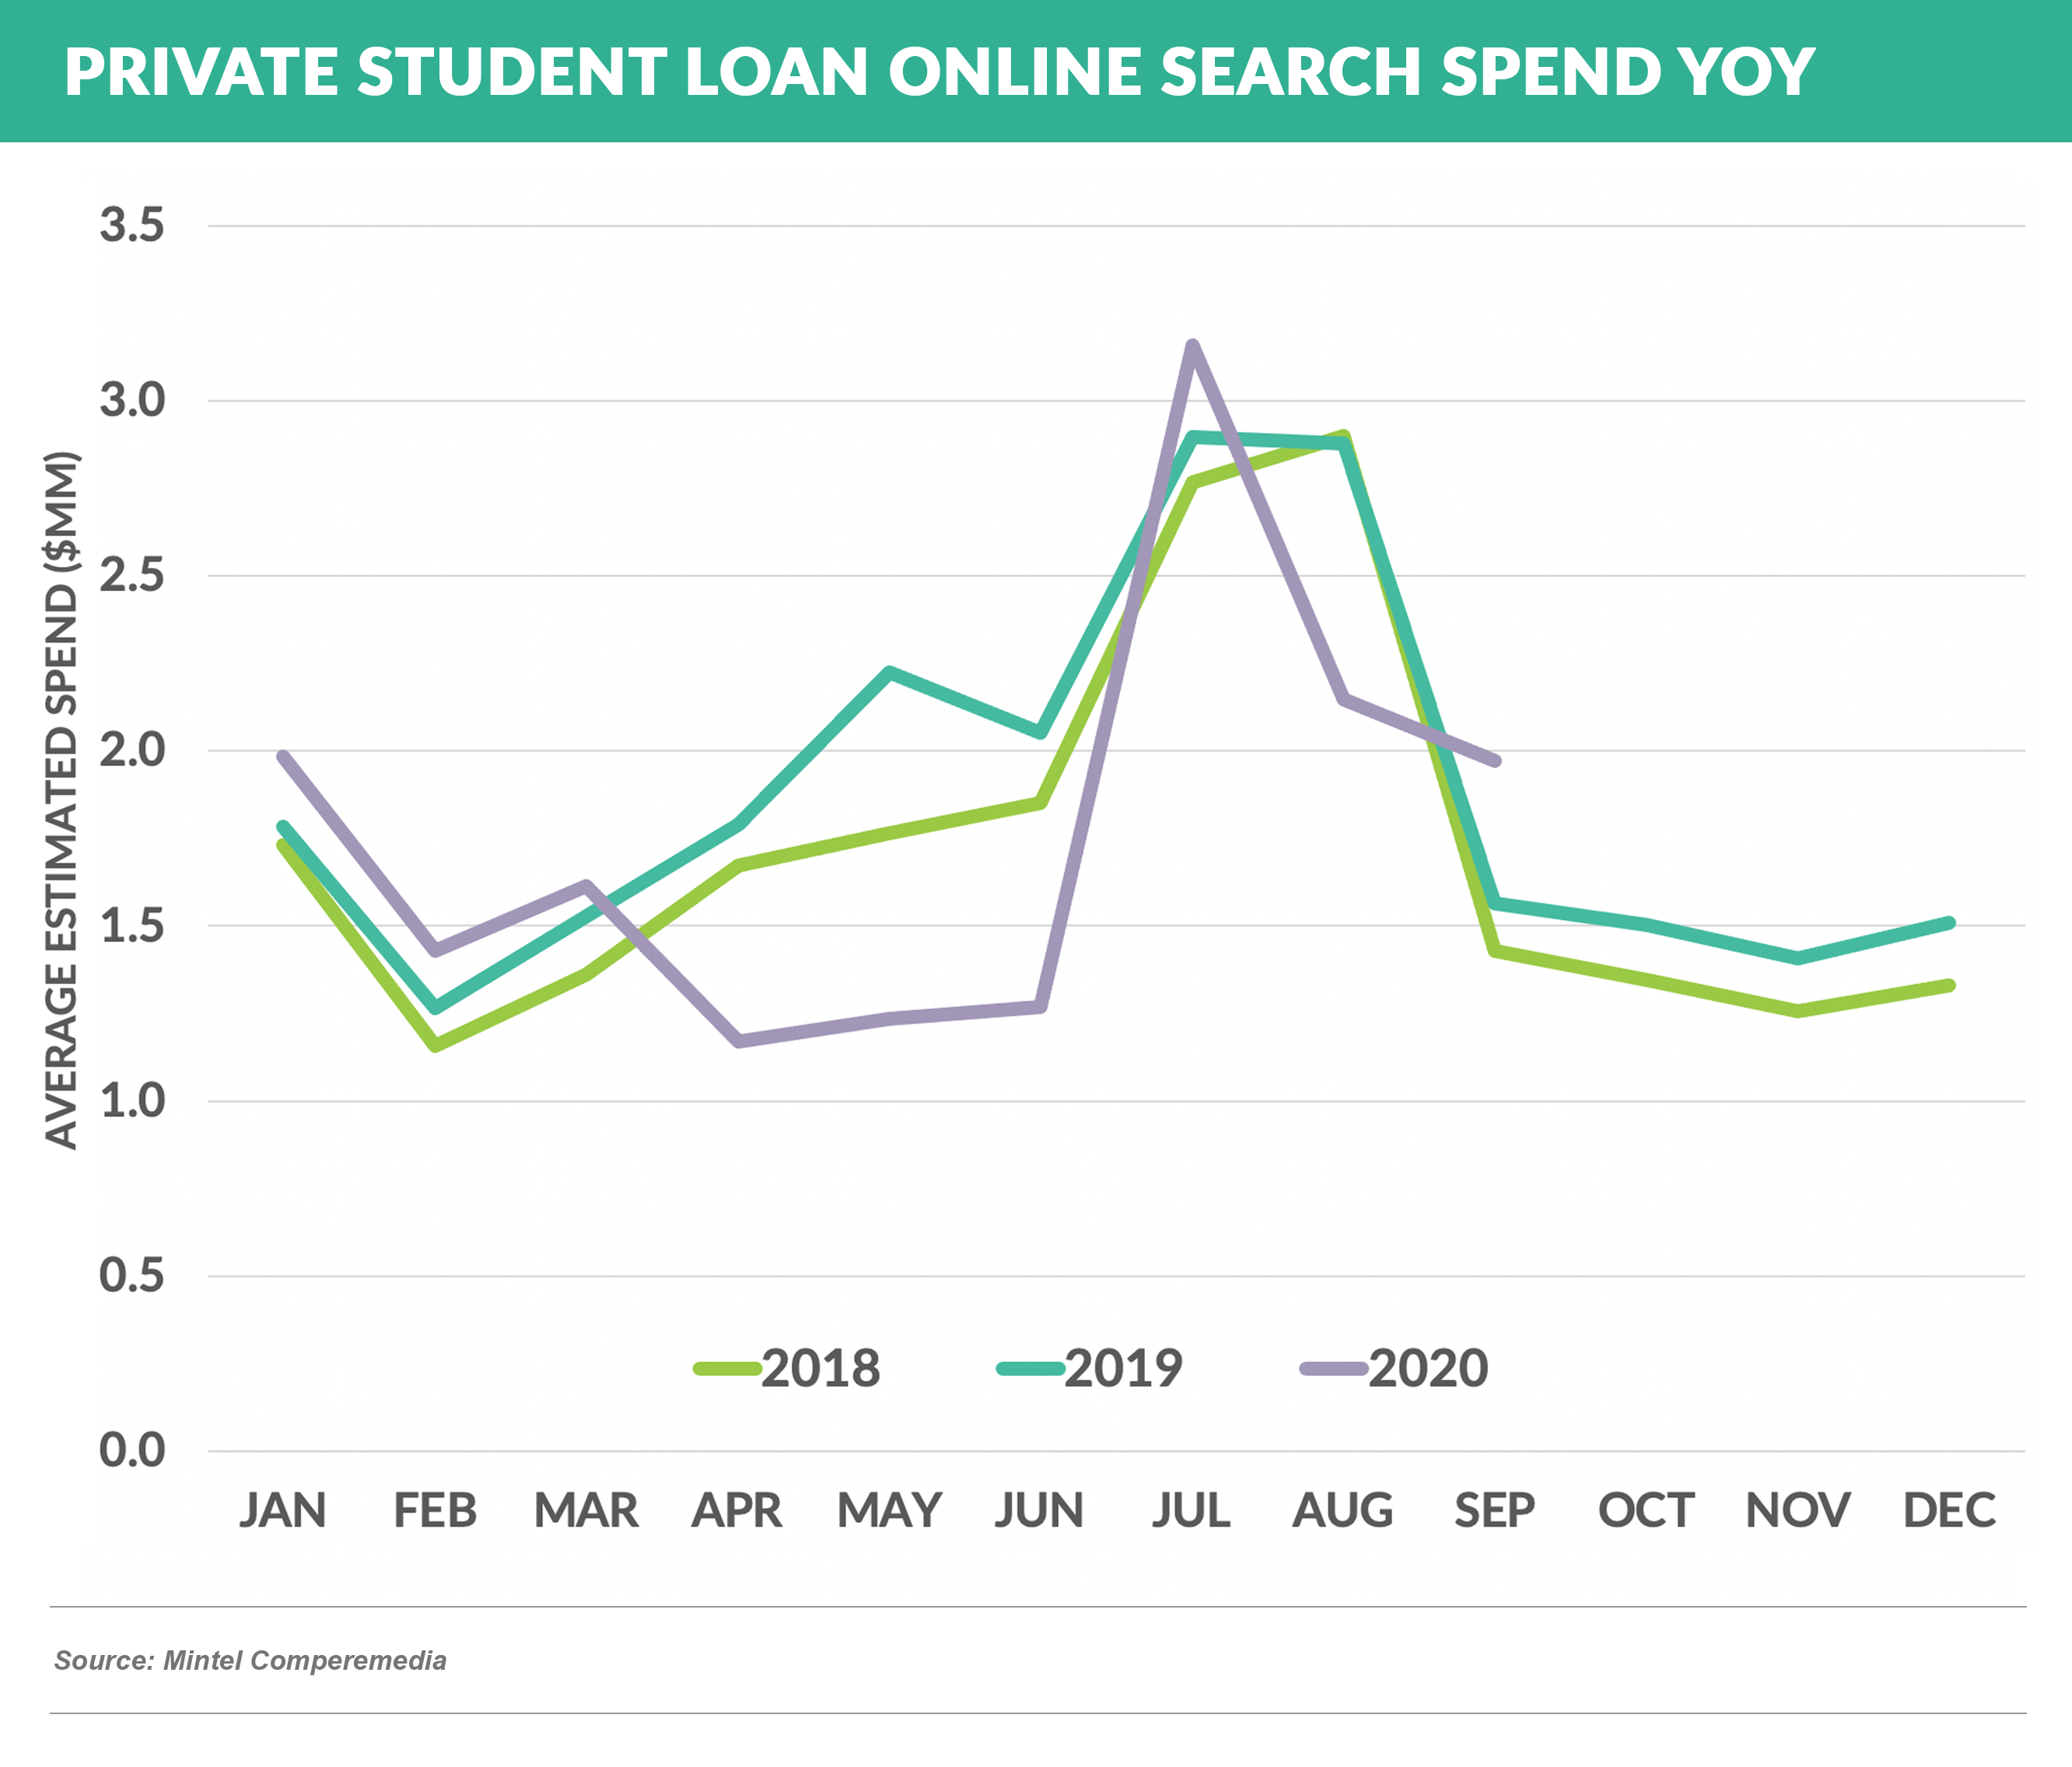 Private Student Loan Online Search Spend YOY